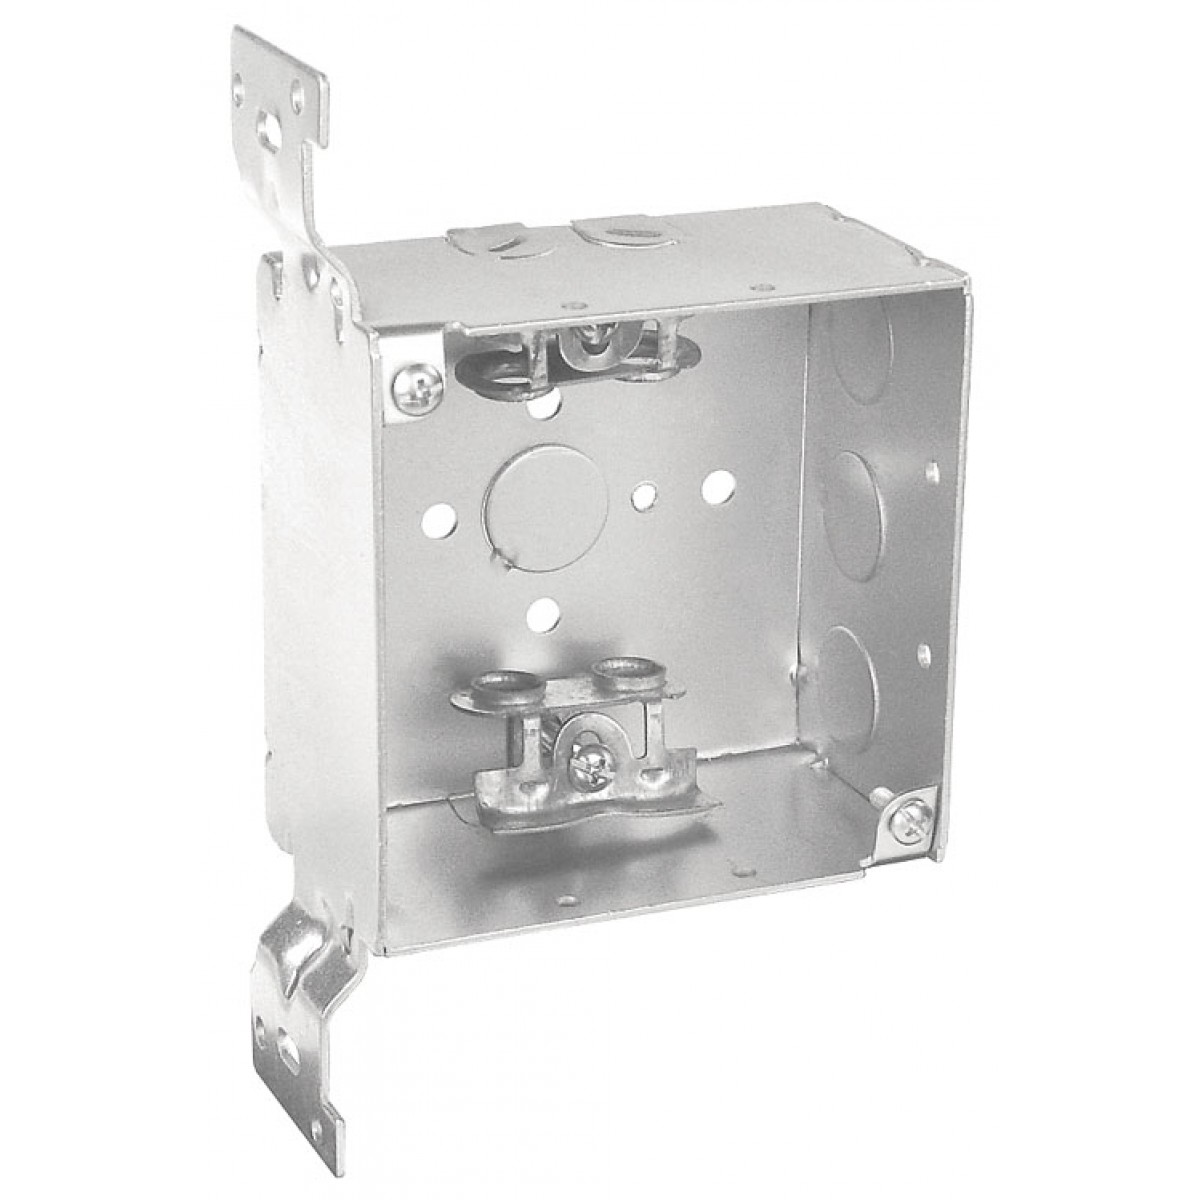 2 Pcs, 4" Square Junction Bracket Box, 2-1/8 In. Deep, (2) 1/2 In. & (1) 1/2-3/4 In. Side Knockouts & (4) Mc/Bx Clamps; (1) 1/2 In. Bottom Knockout, Flat Vertical Bracket, .0625 Galvanized Steel - image 1 of 1